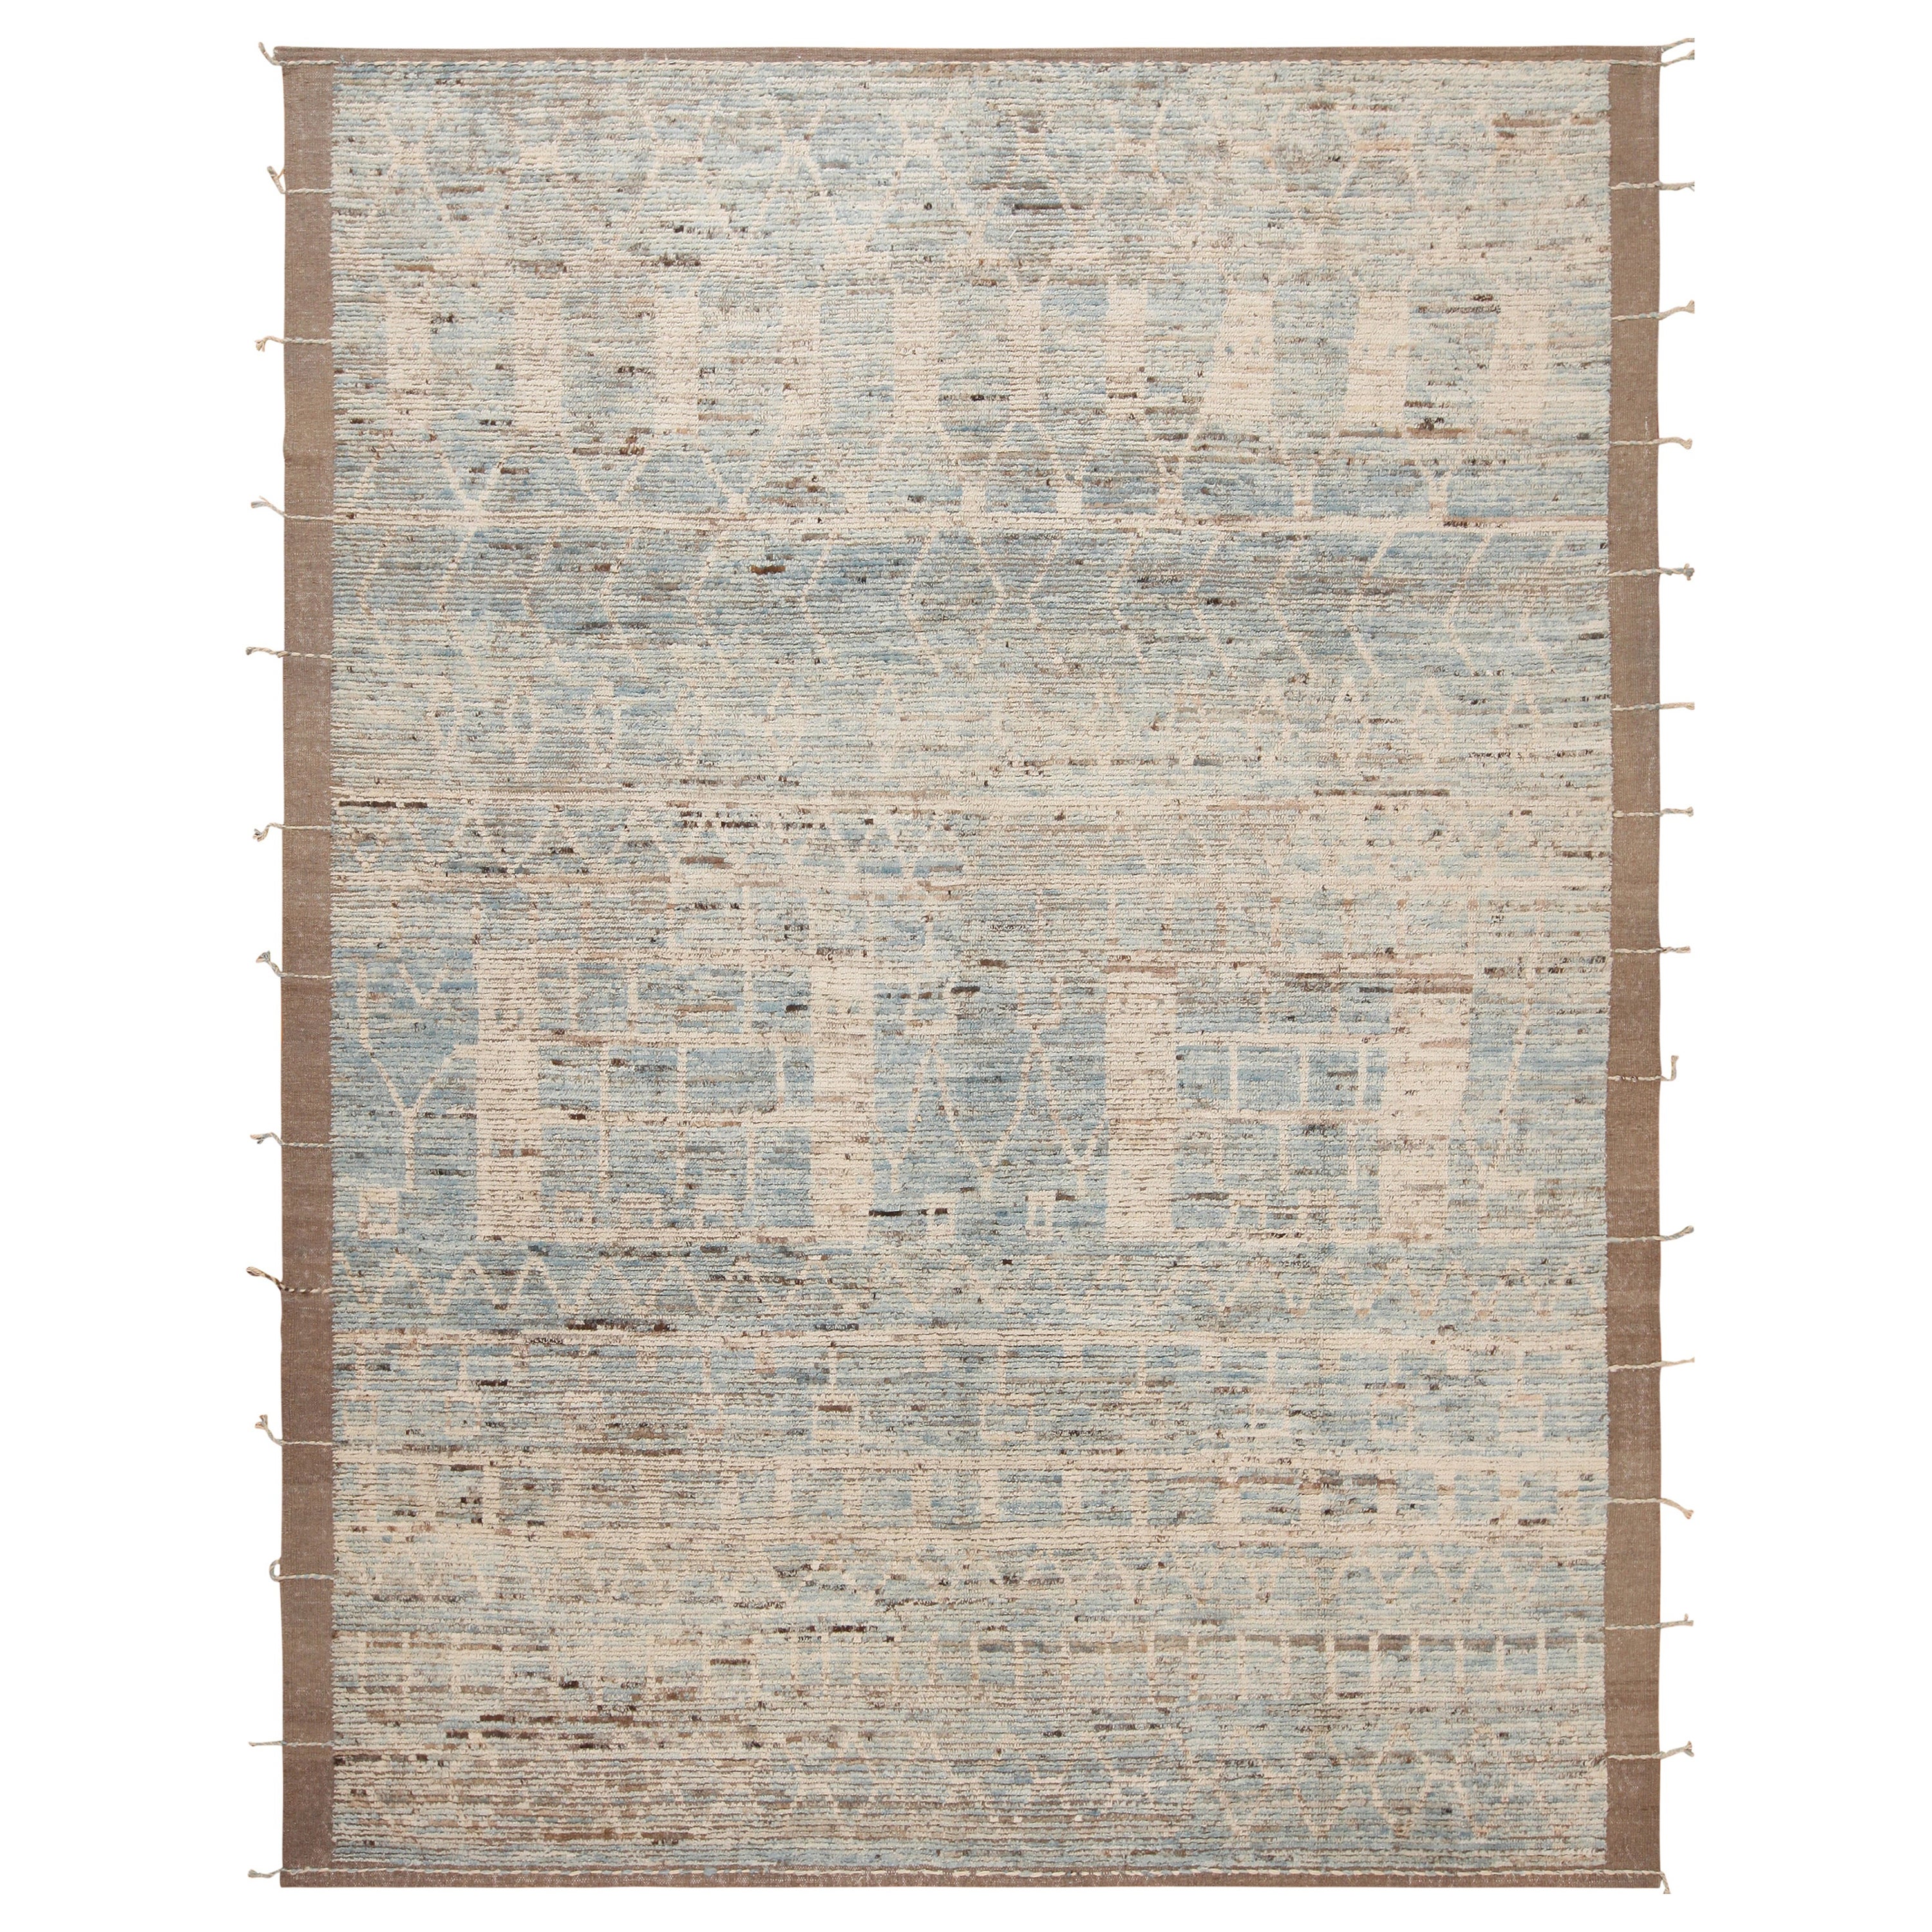 Nazmiyal Collection Moroccan Design Modern Distressed Rug. 9 ft 1 in x 12 ft 2in